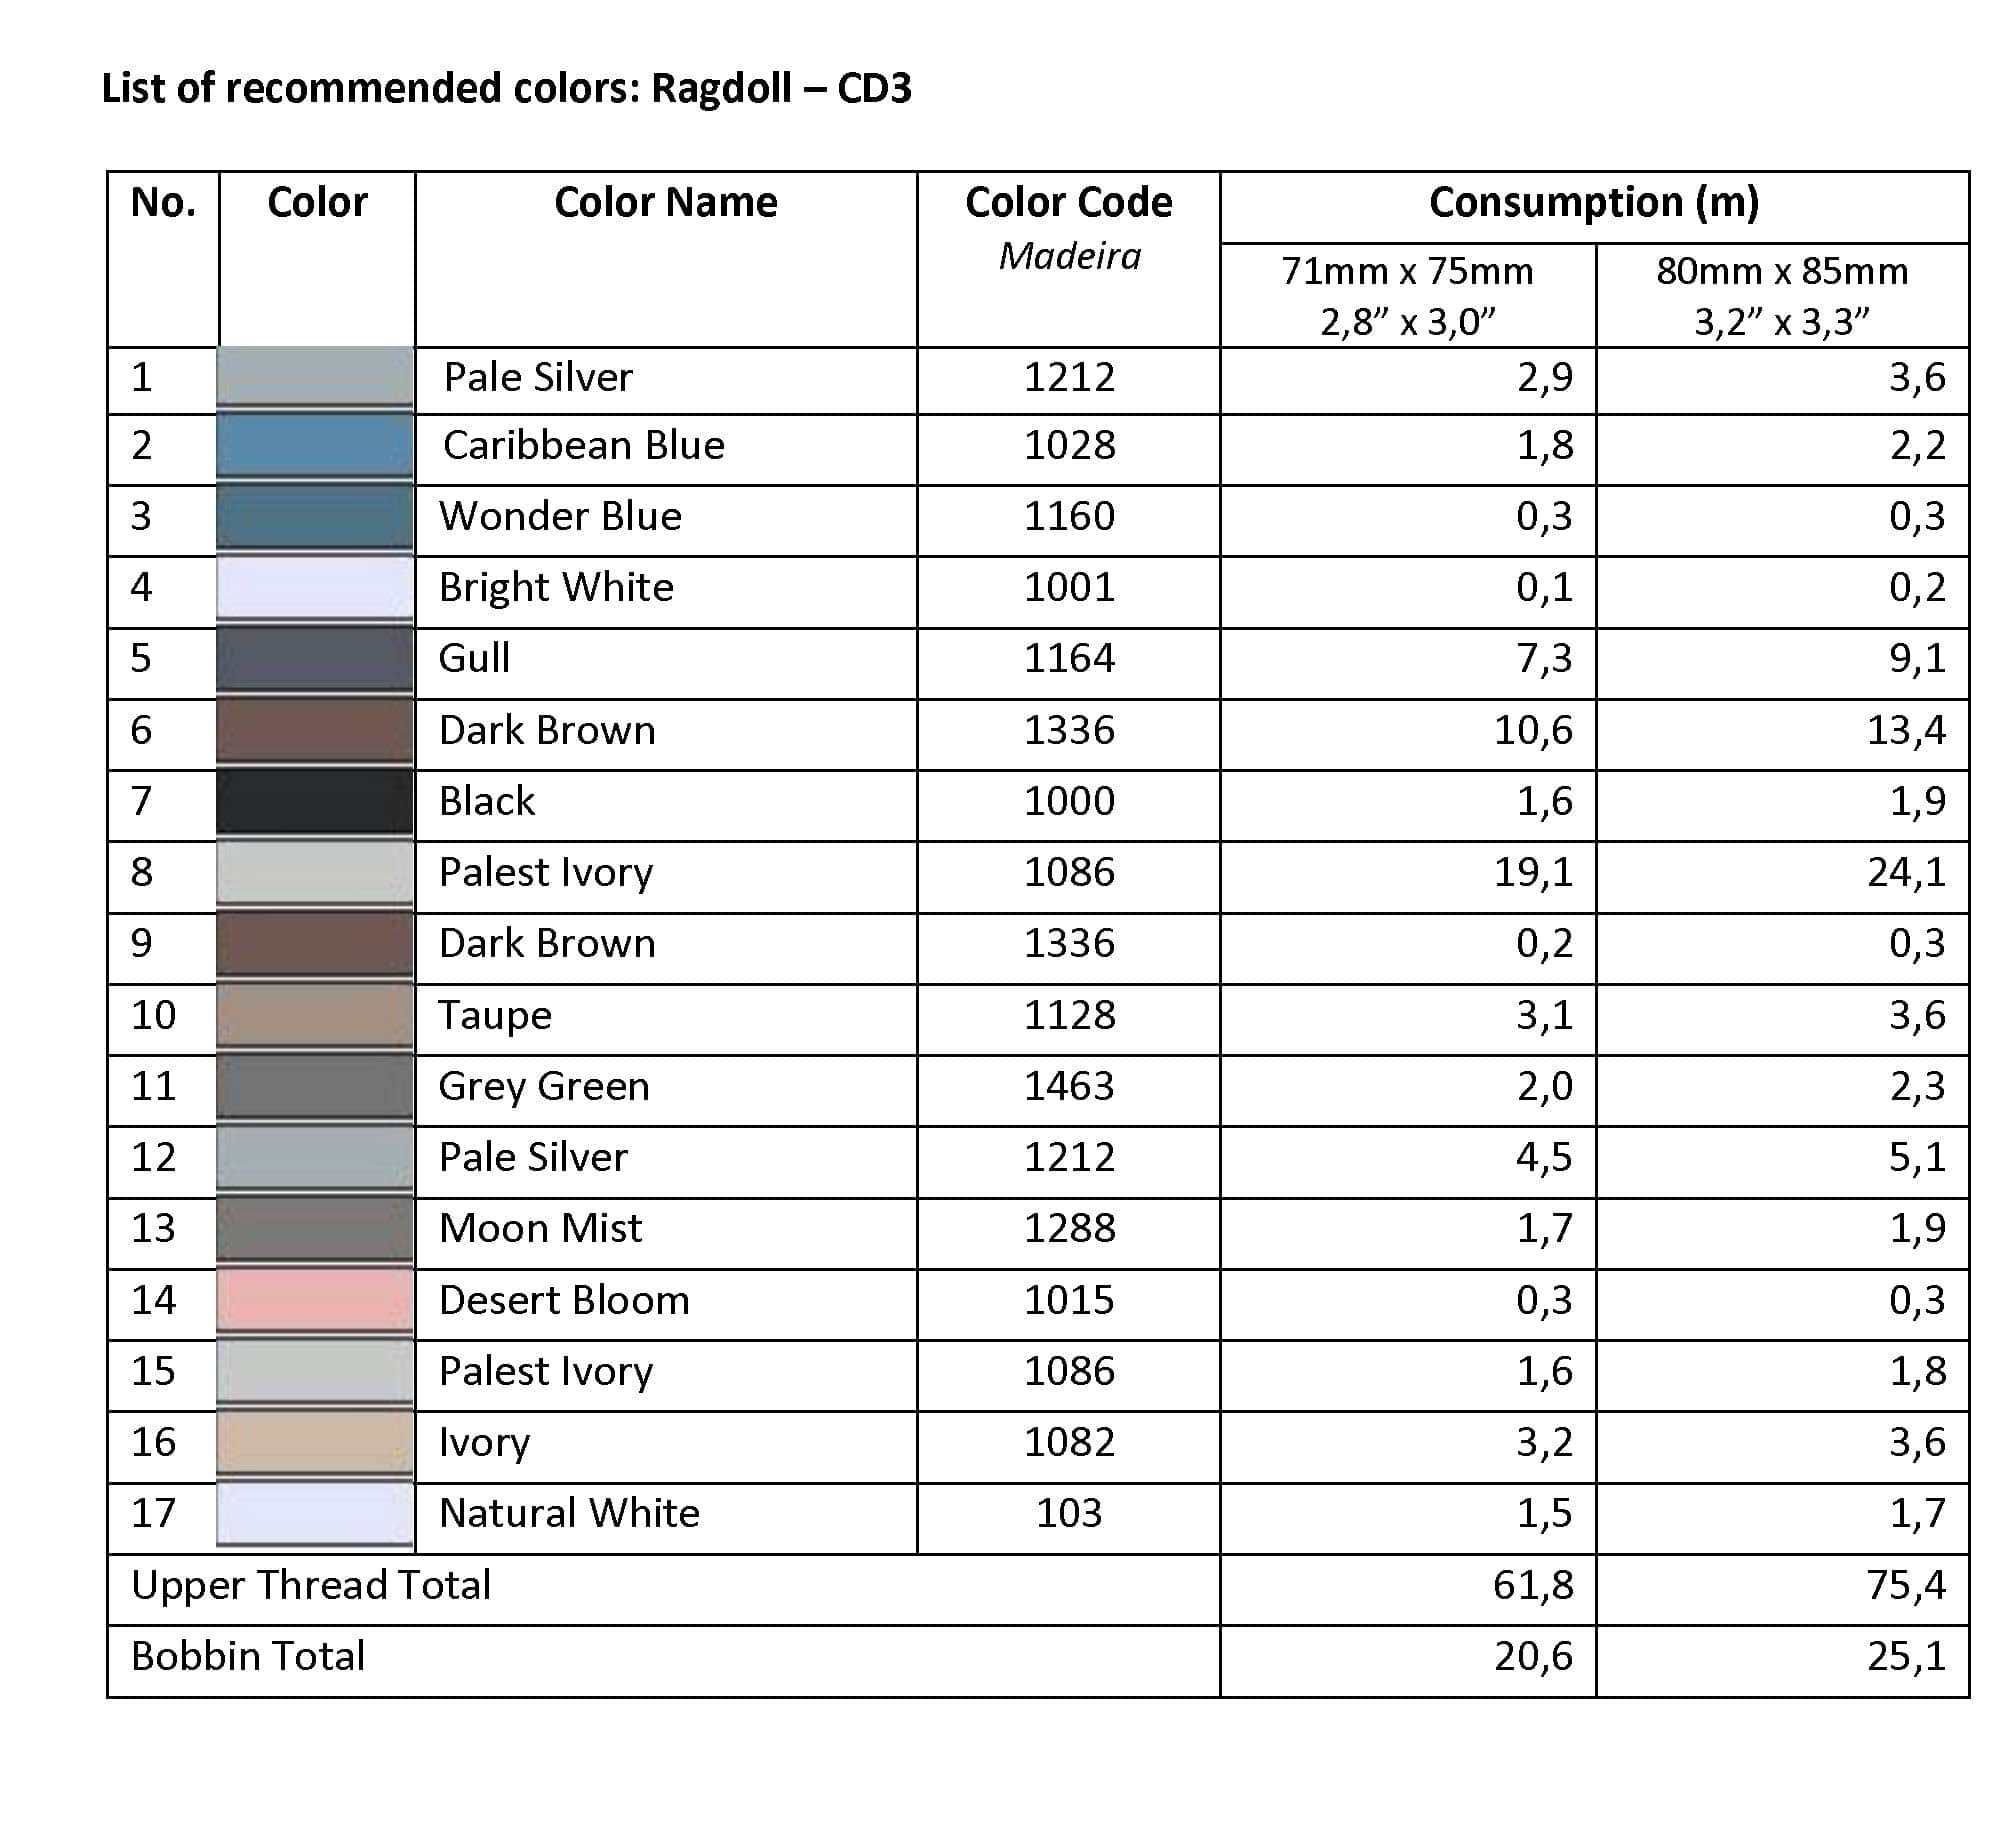 List of Recommended Colors - Ragdoll CD3